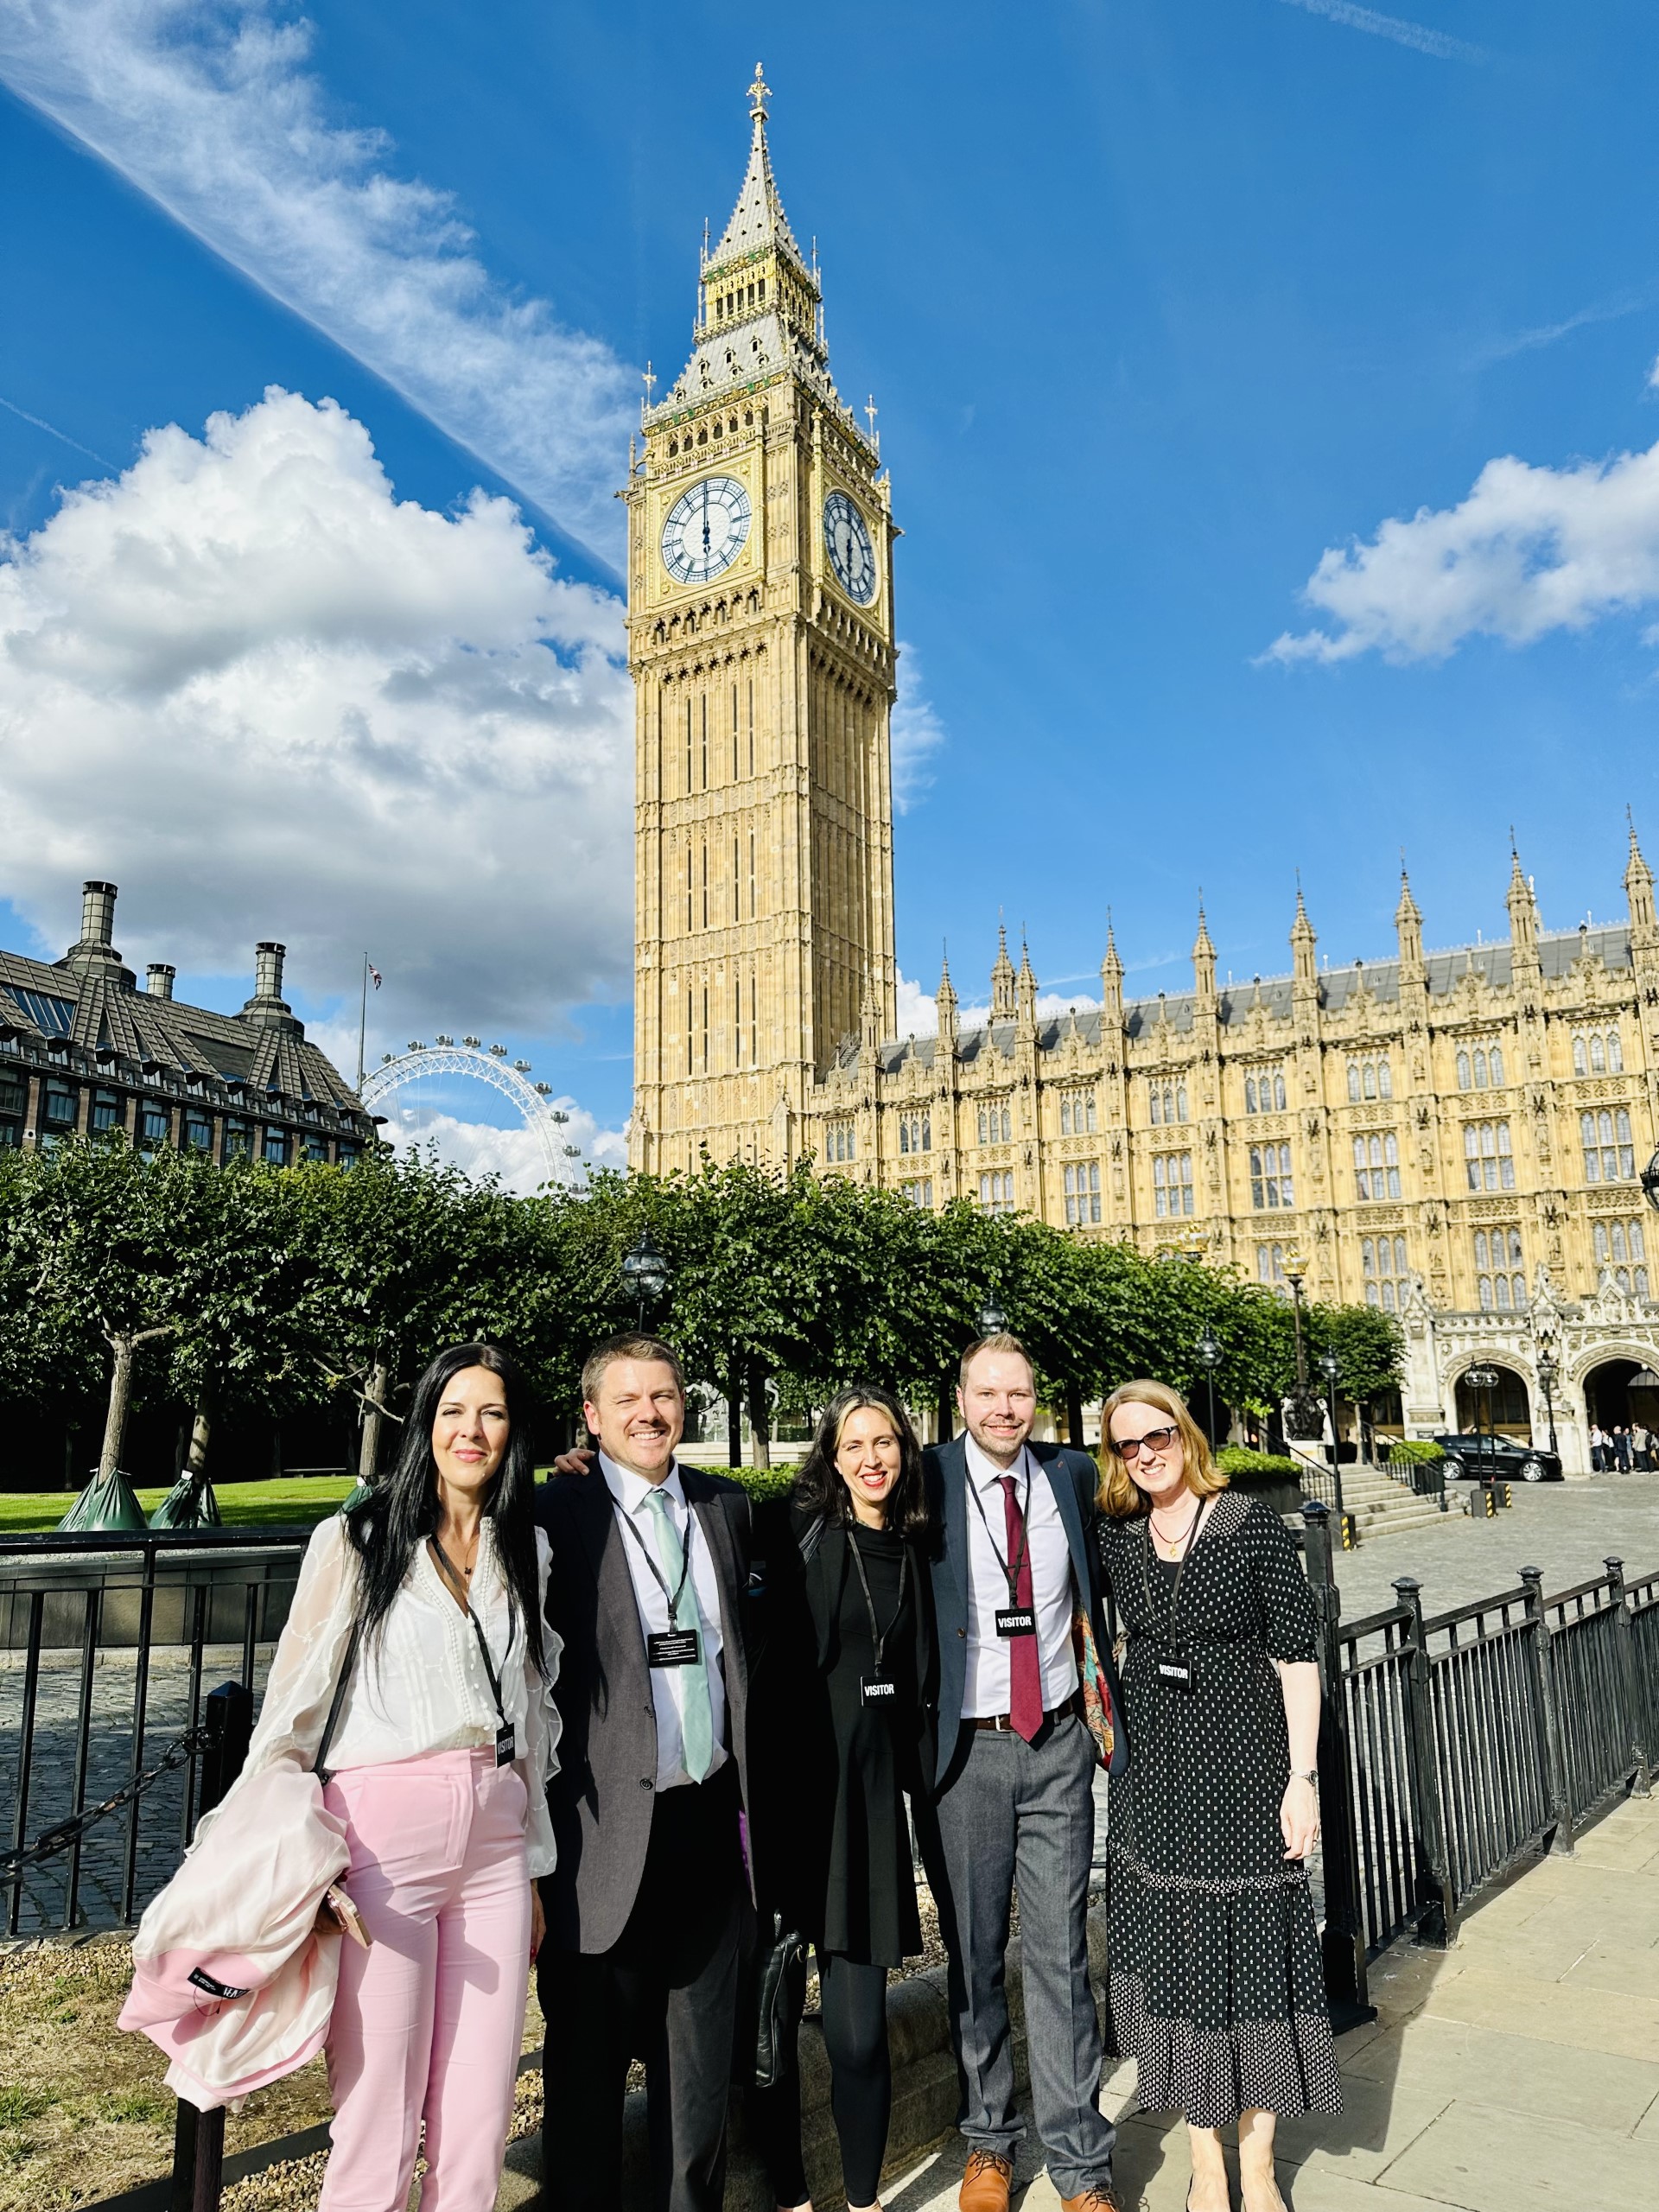 "Lingustics in Modern Foreign Languages" group at Westminster. 